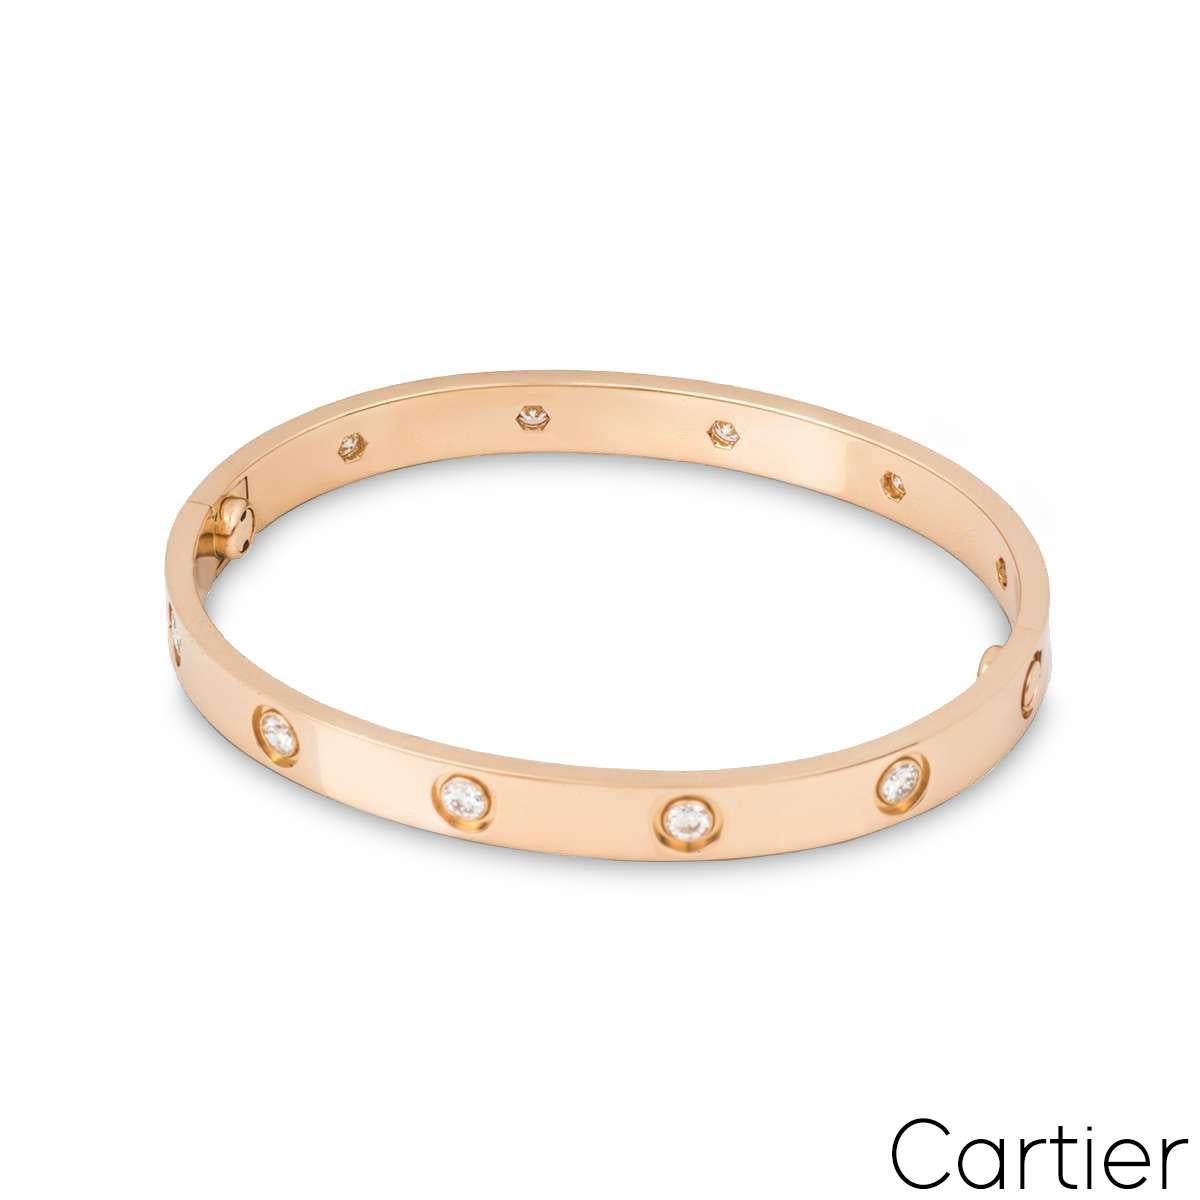 An 18k rose gold, full diamond Love bracelet by Cartier. Set with 10 round brilliant cut diamonds circulating the outer edge, totalling 0.96ct. The bracelet features the new style screw fitting, is a size 17, measures 6.1mm in width and has a gross